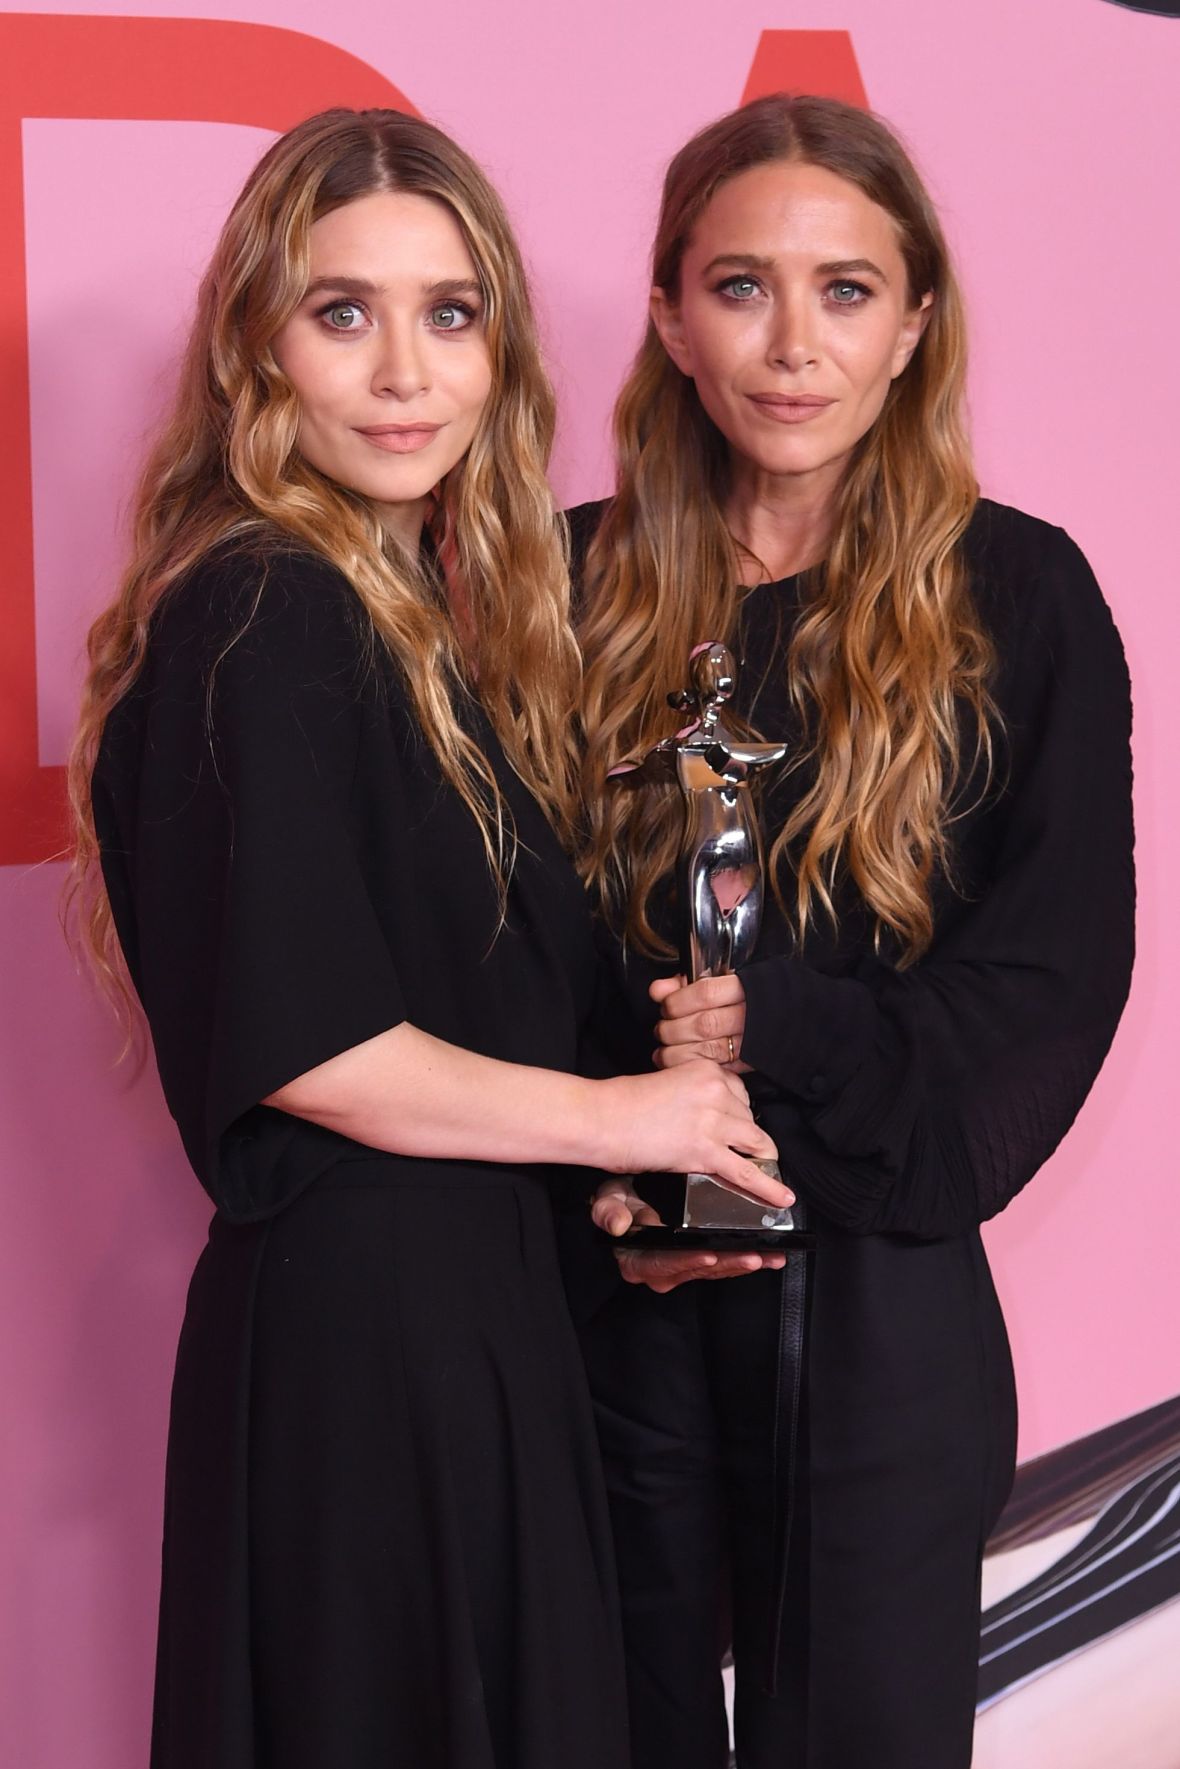 Elizabeth Olsen Almost Dropped Mary-Kate and Ashley's Last Name